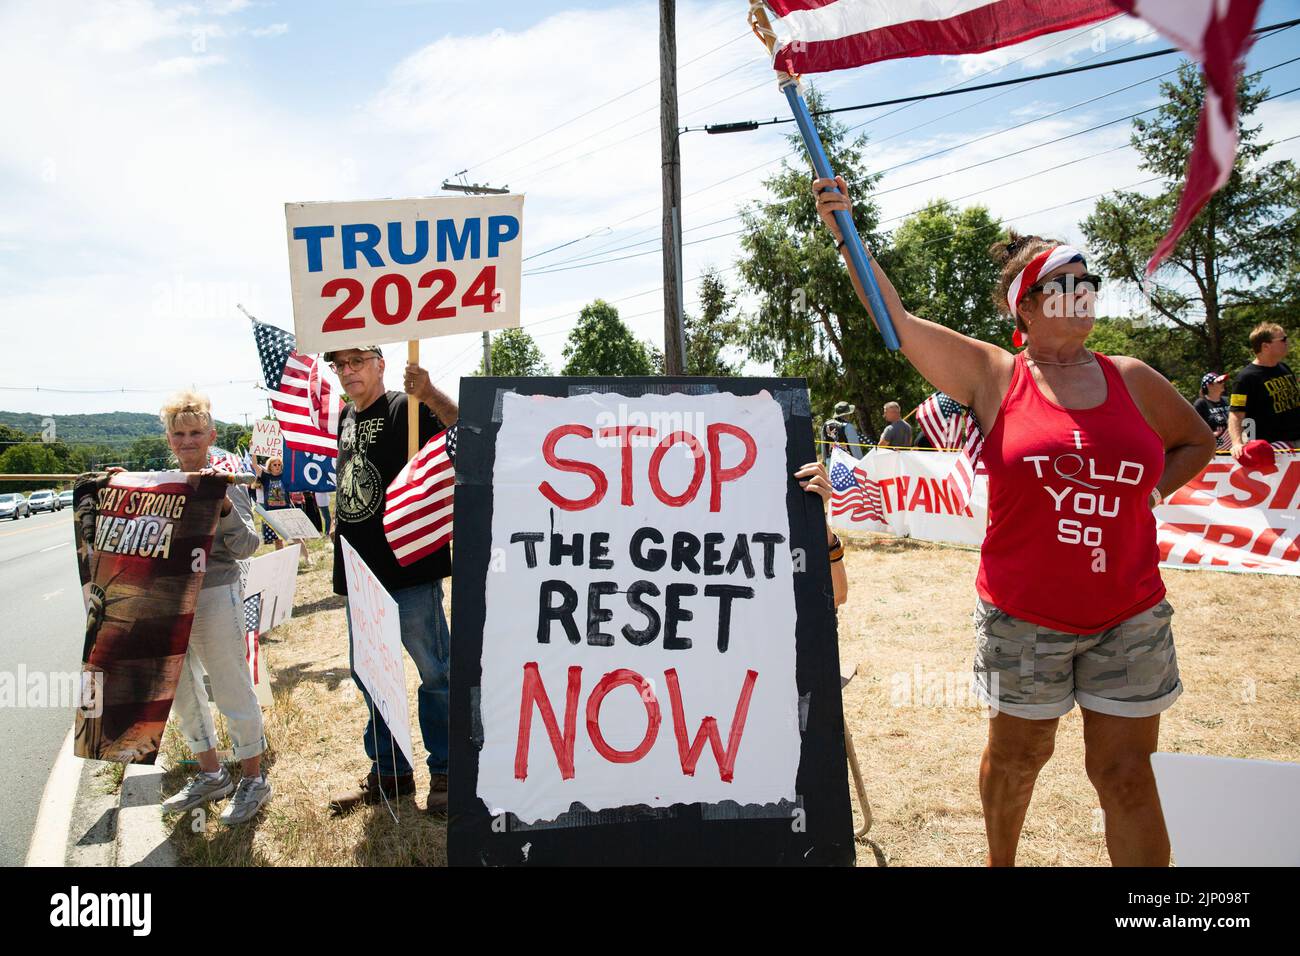 Bedminster, United States. 14th Aug, 2022. Protesters hold signs reading, 'Stop the great reset now' and 'Trump 20224' seen during the Trump supporters rally. Trump supporters rally at the corner of Lamington Road and Route 206 near the Trump National Golf Club in Bedminster, New Jersey. This comes following the FBI's raid on former President Donald Trump's Mar-A-Lago home. Credit: SOPA Images Limited/Alamy Live News Stock Photo